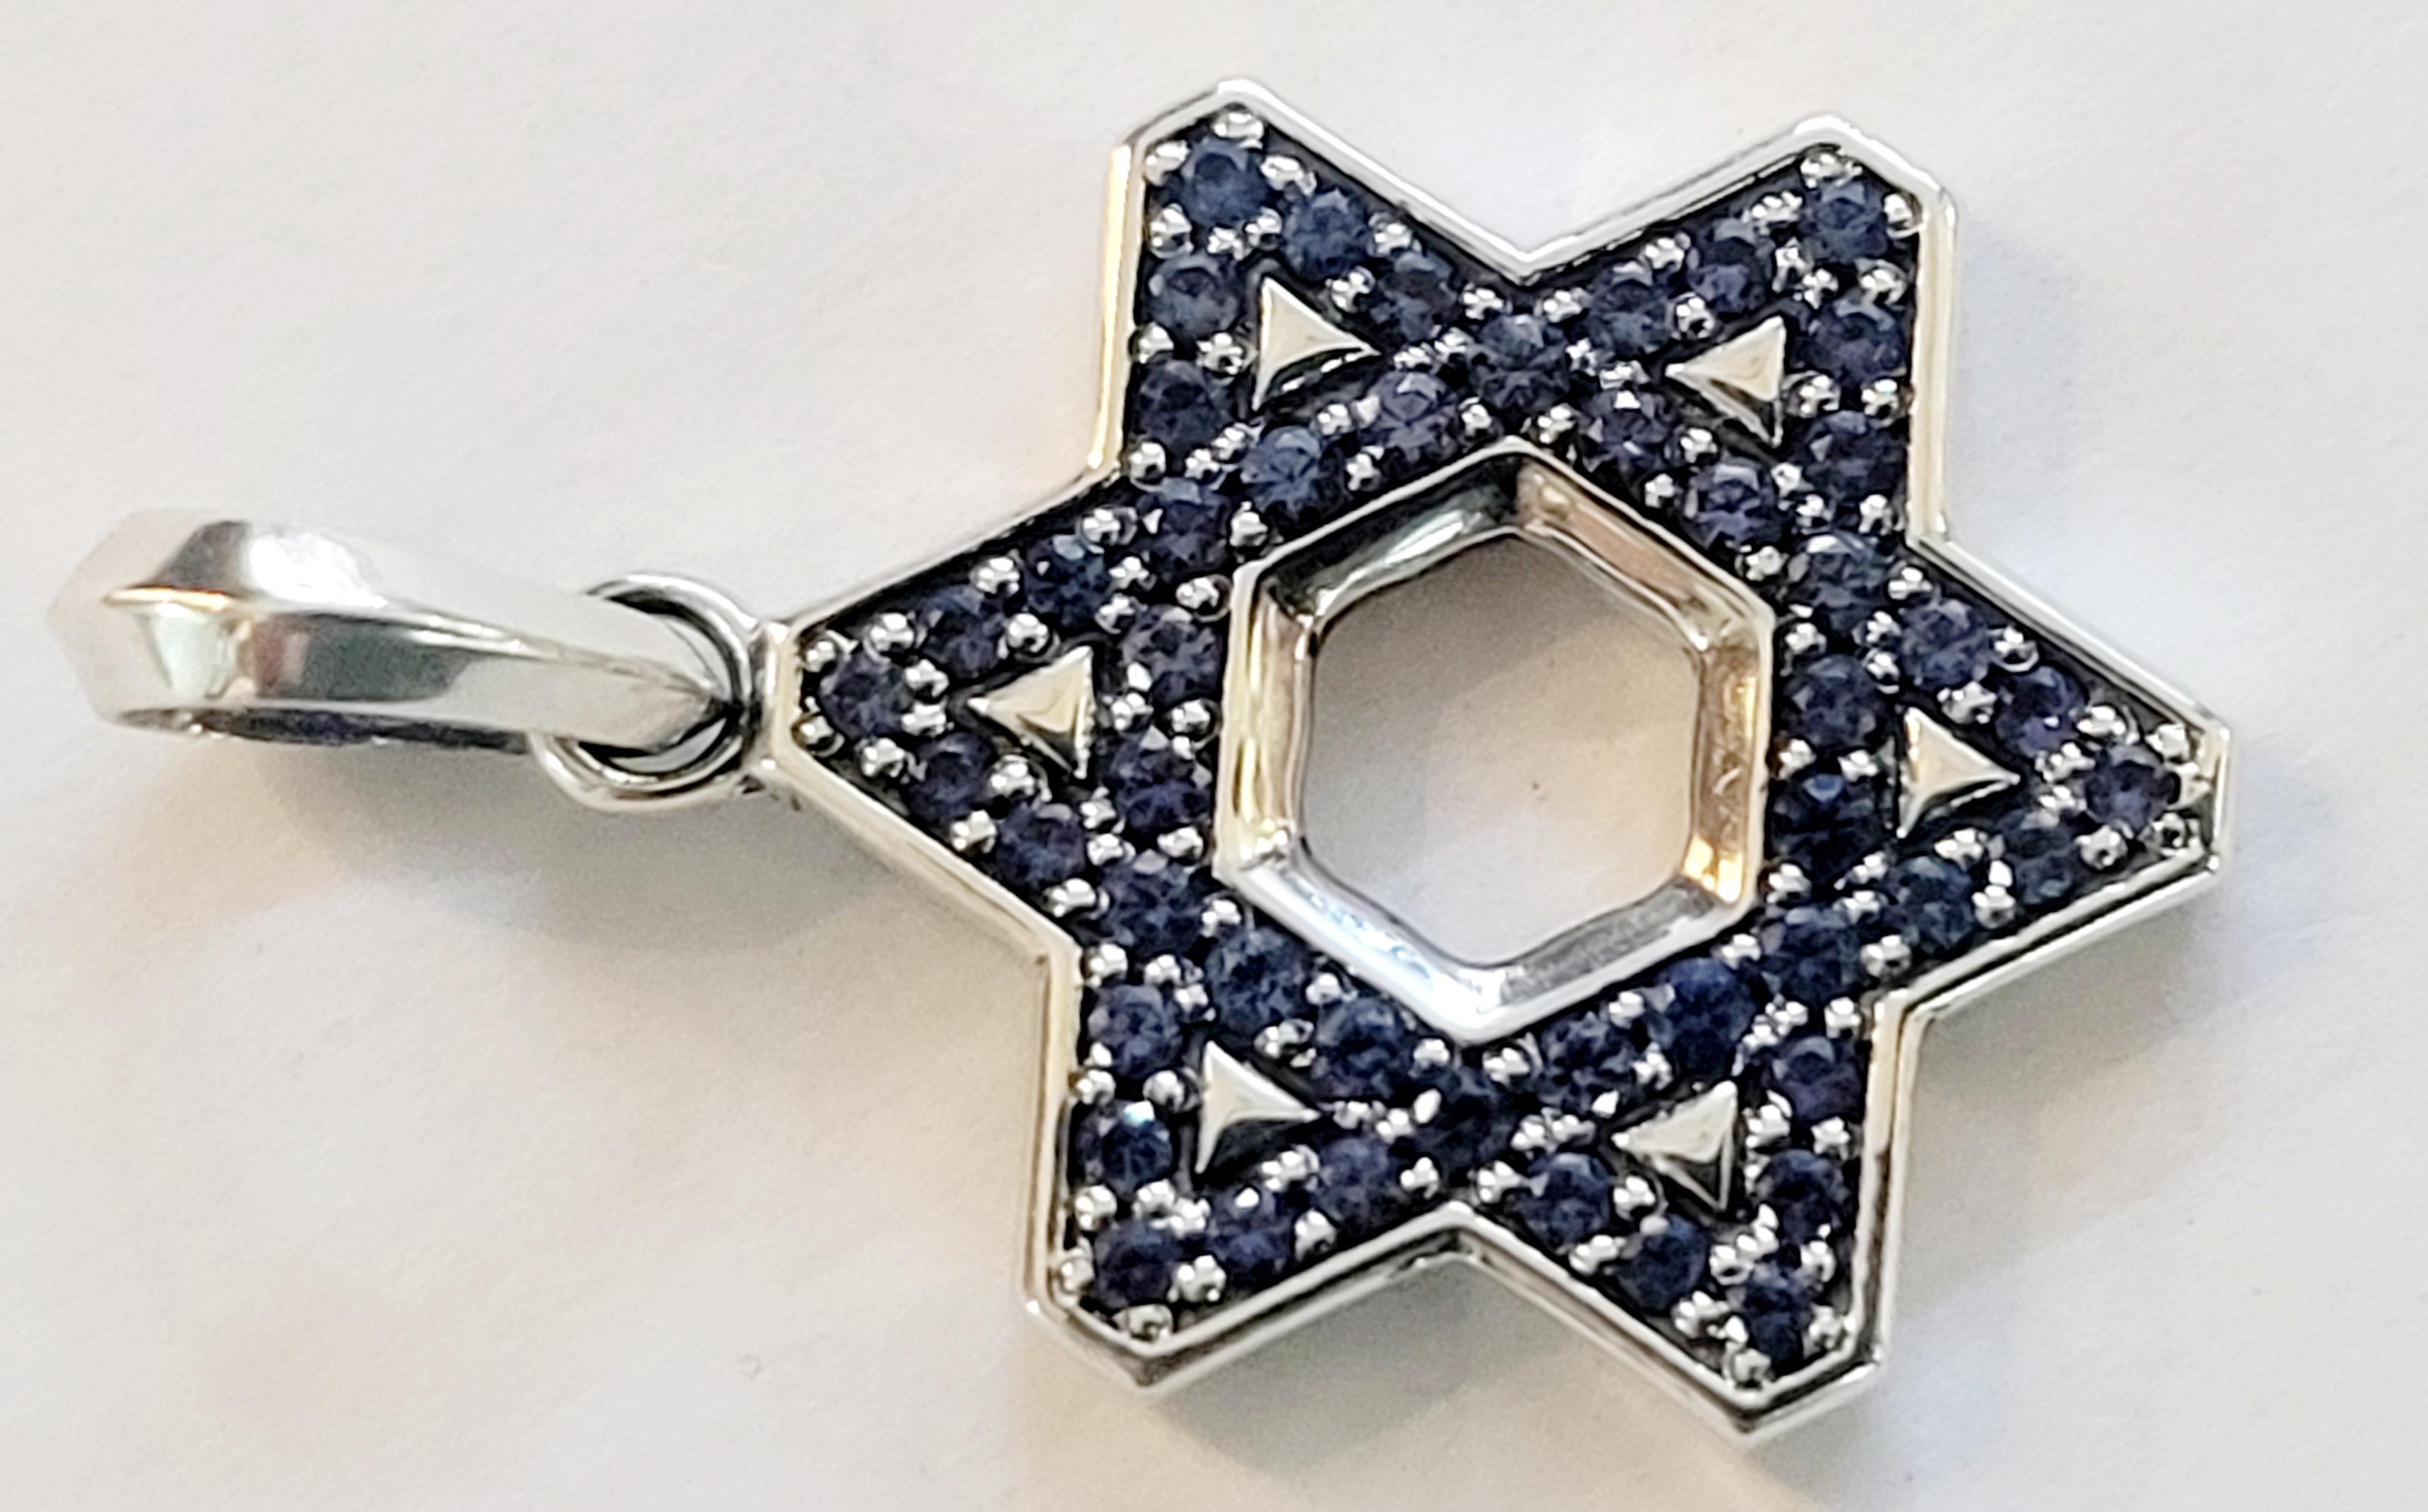 David yurtman 
Star of David Pendant 
Material Sterling Silver 
Pendant Dimension 22.6 X 22.6mm 
With Bail 34.7mm
Pendant Weight 6.8gr
Condition new, never worn
David Yurman Pouch Included
Retail Price $1.550